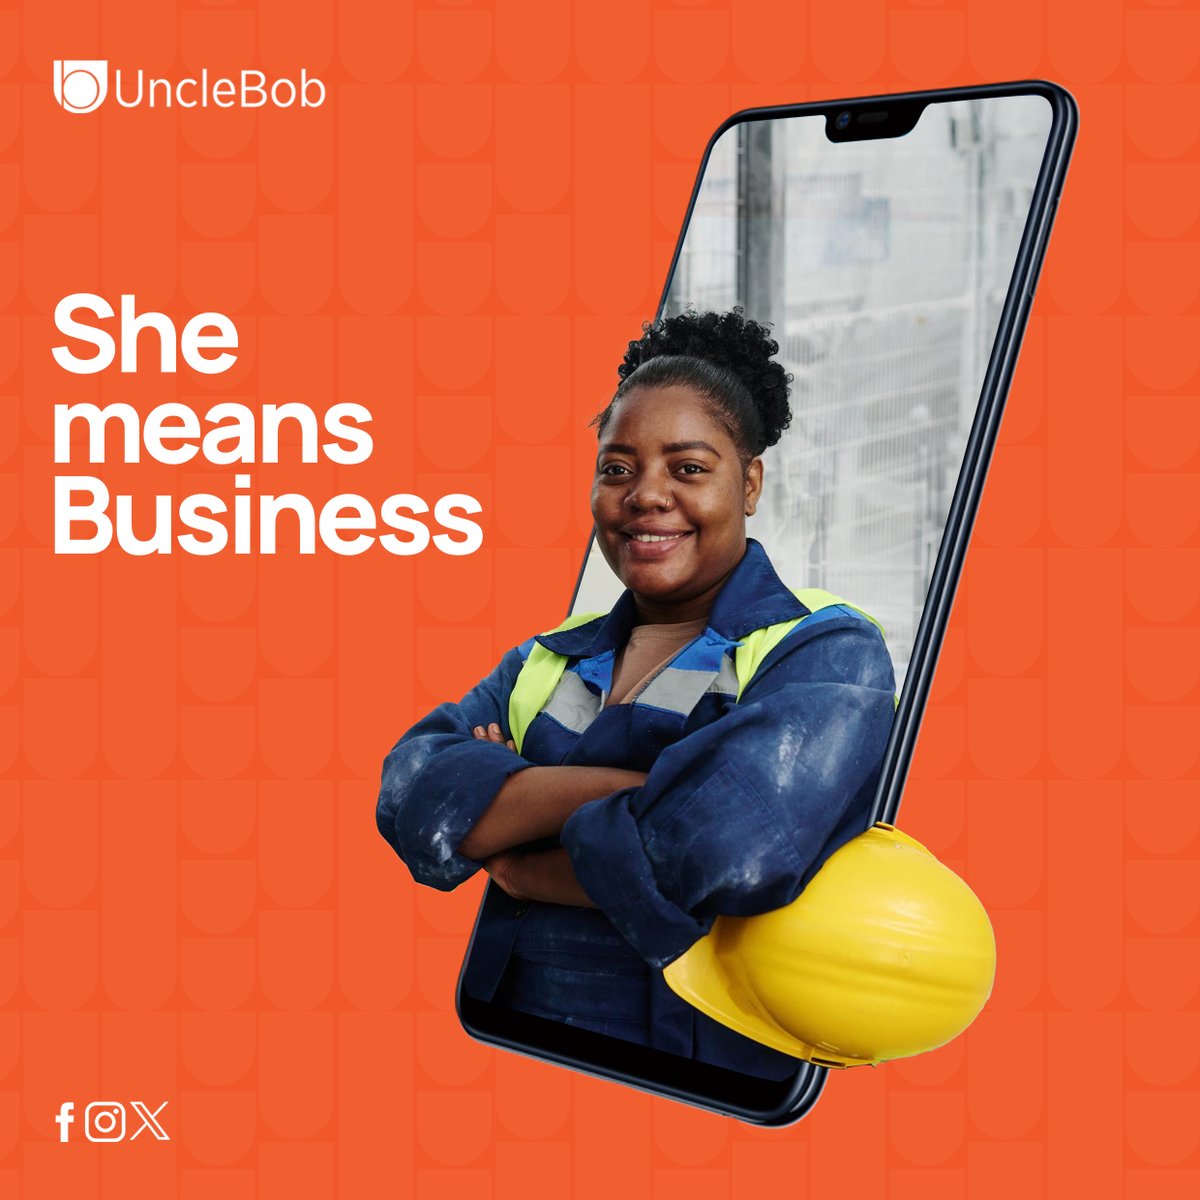 Uncle Bob proudly supports women in the service industry as they conquer male-dominated fields, because success has no gender. Join us in rewriting the narrative of empowerment and achievement! #SheMeansBusiness